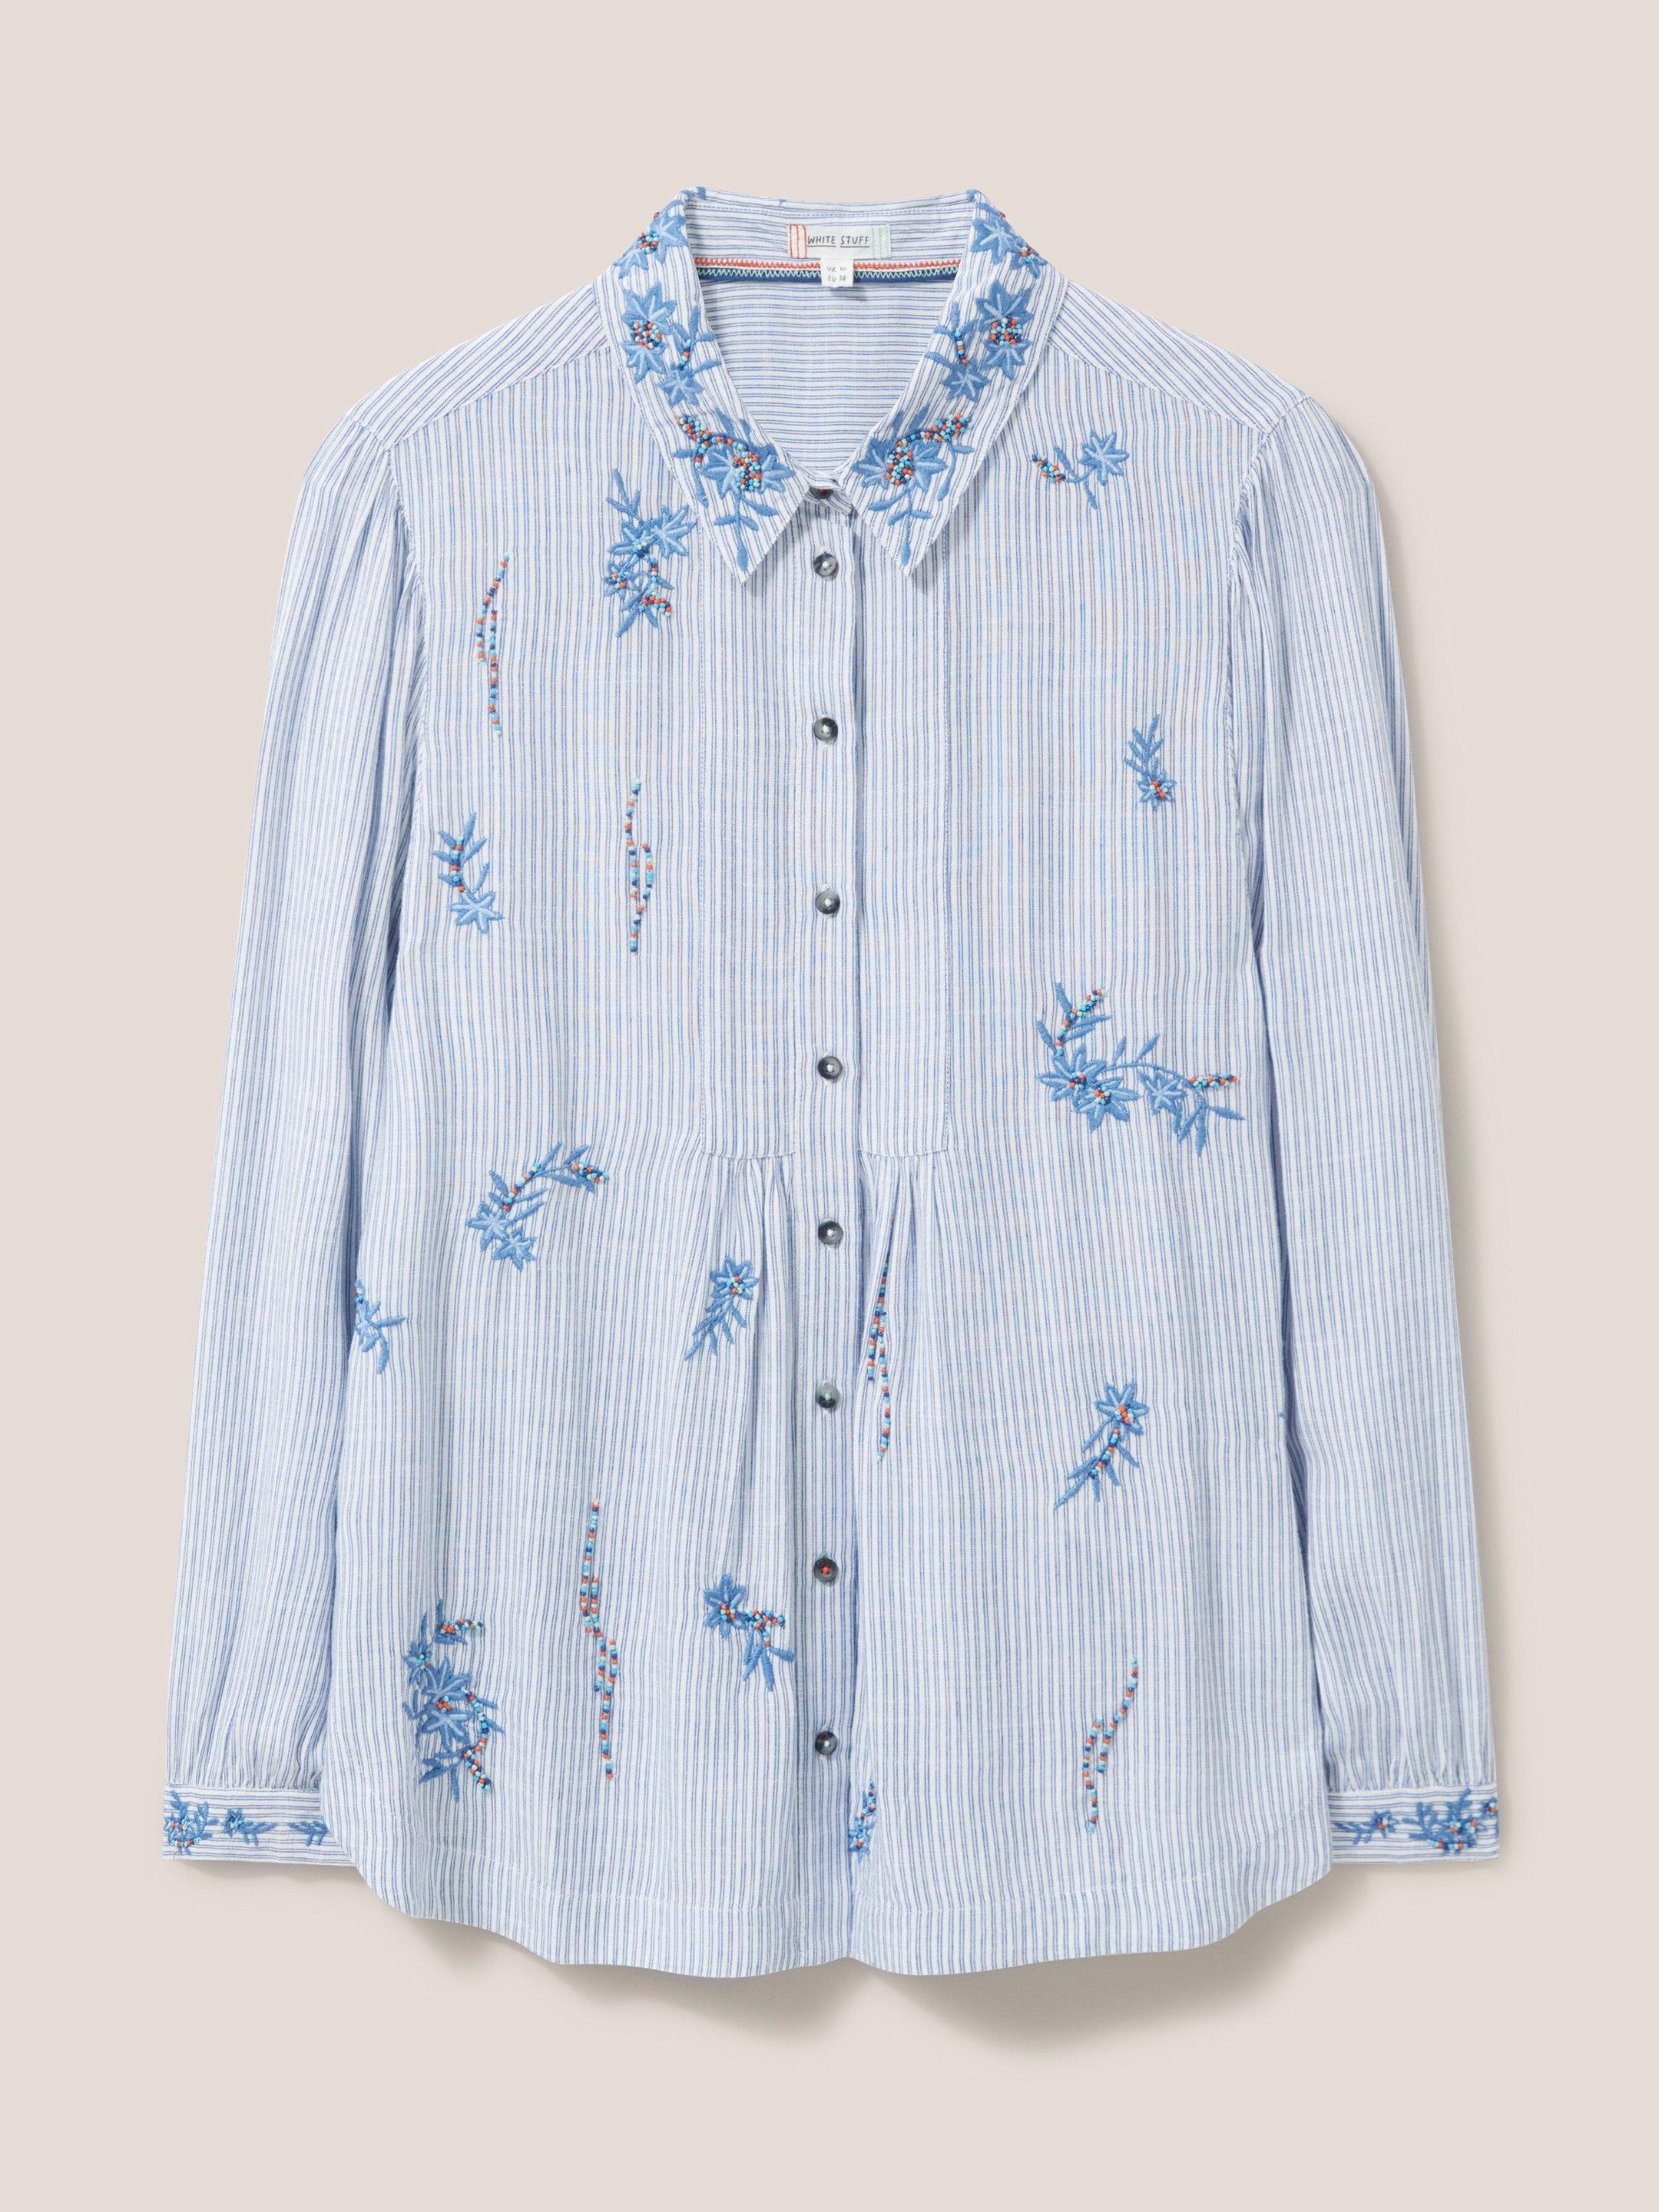 Trailing Embroidered Shirt in BLUE MLT - FLAT FRONT